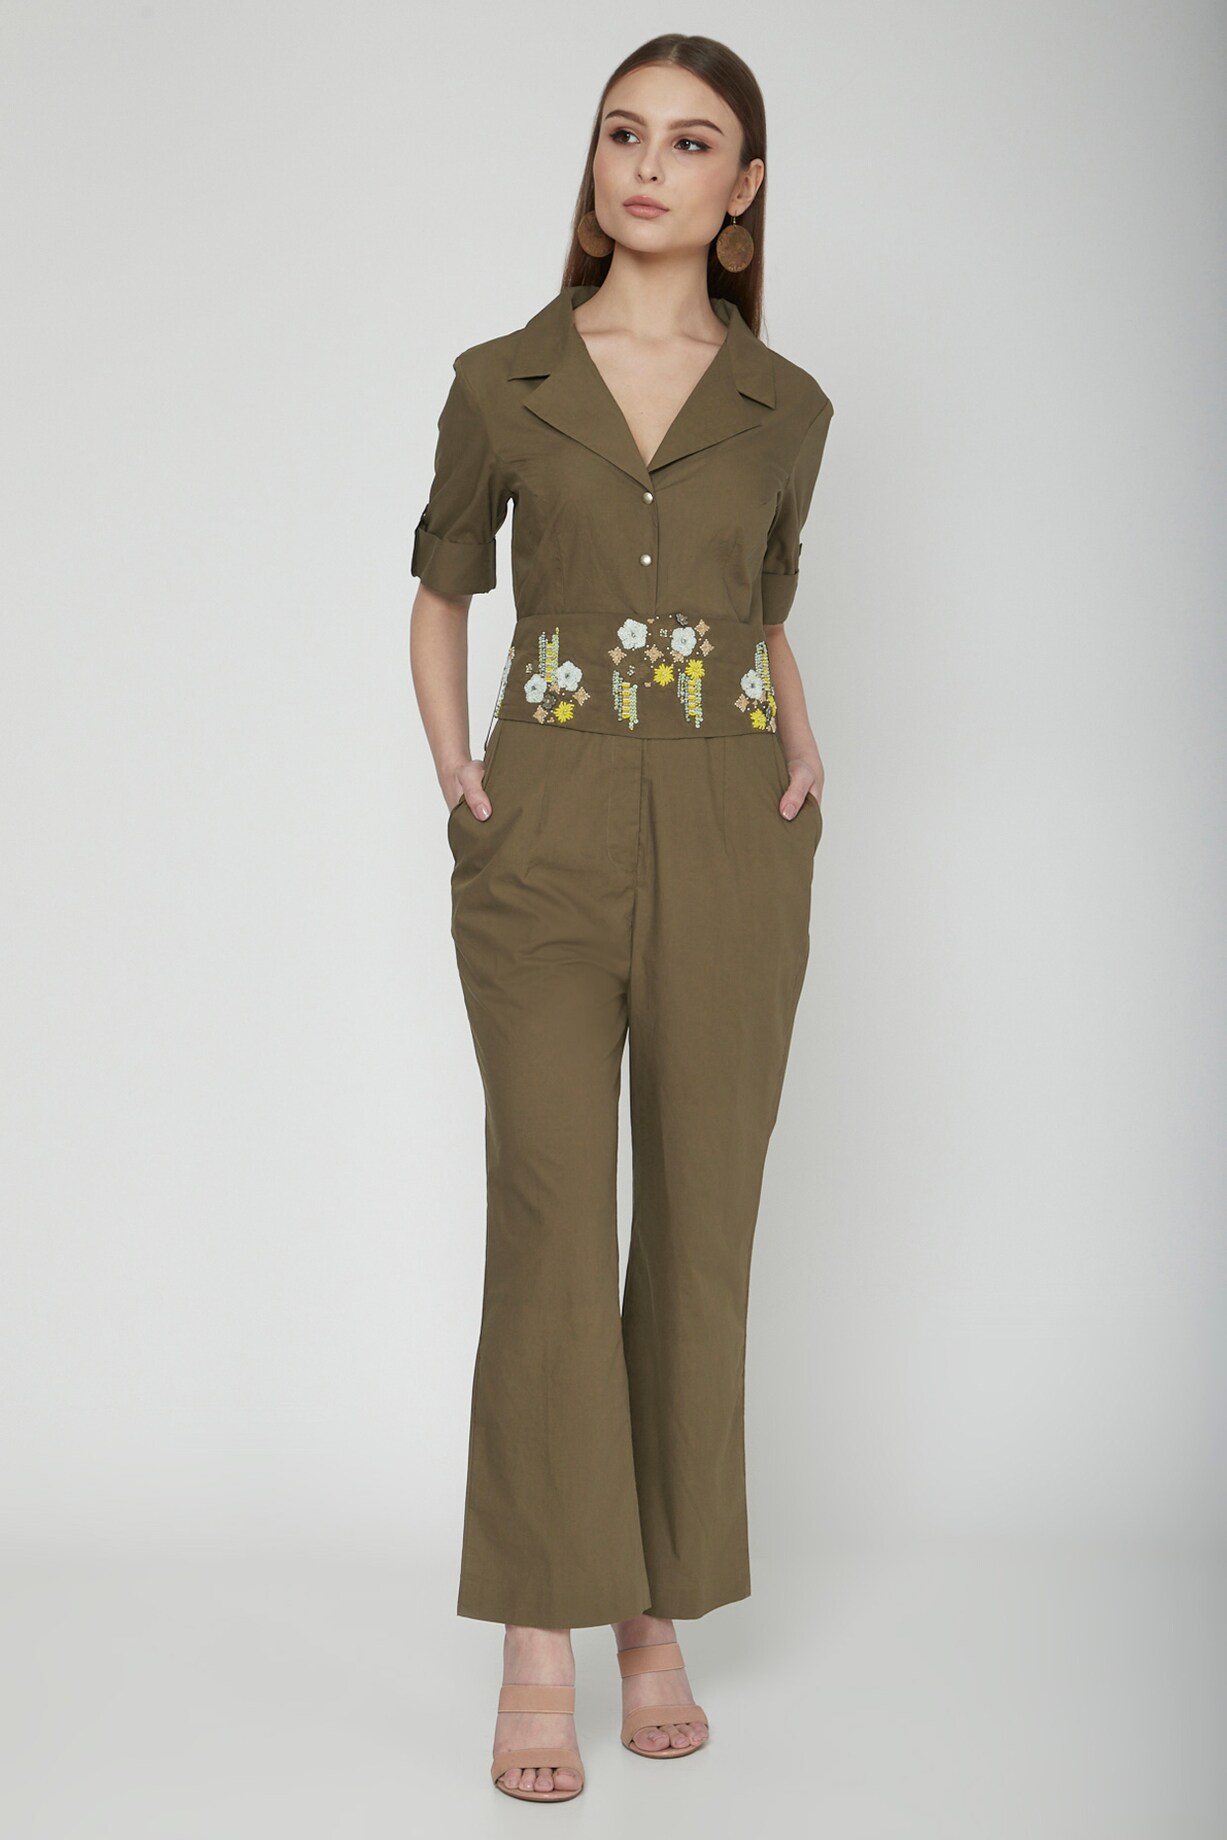 Olive Green Jumpsuit With Embellished Belt Design by Our Love at